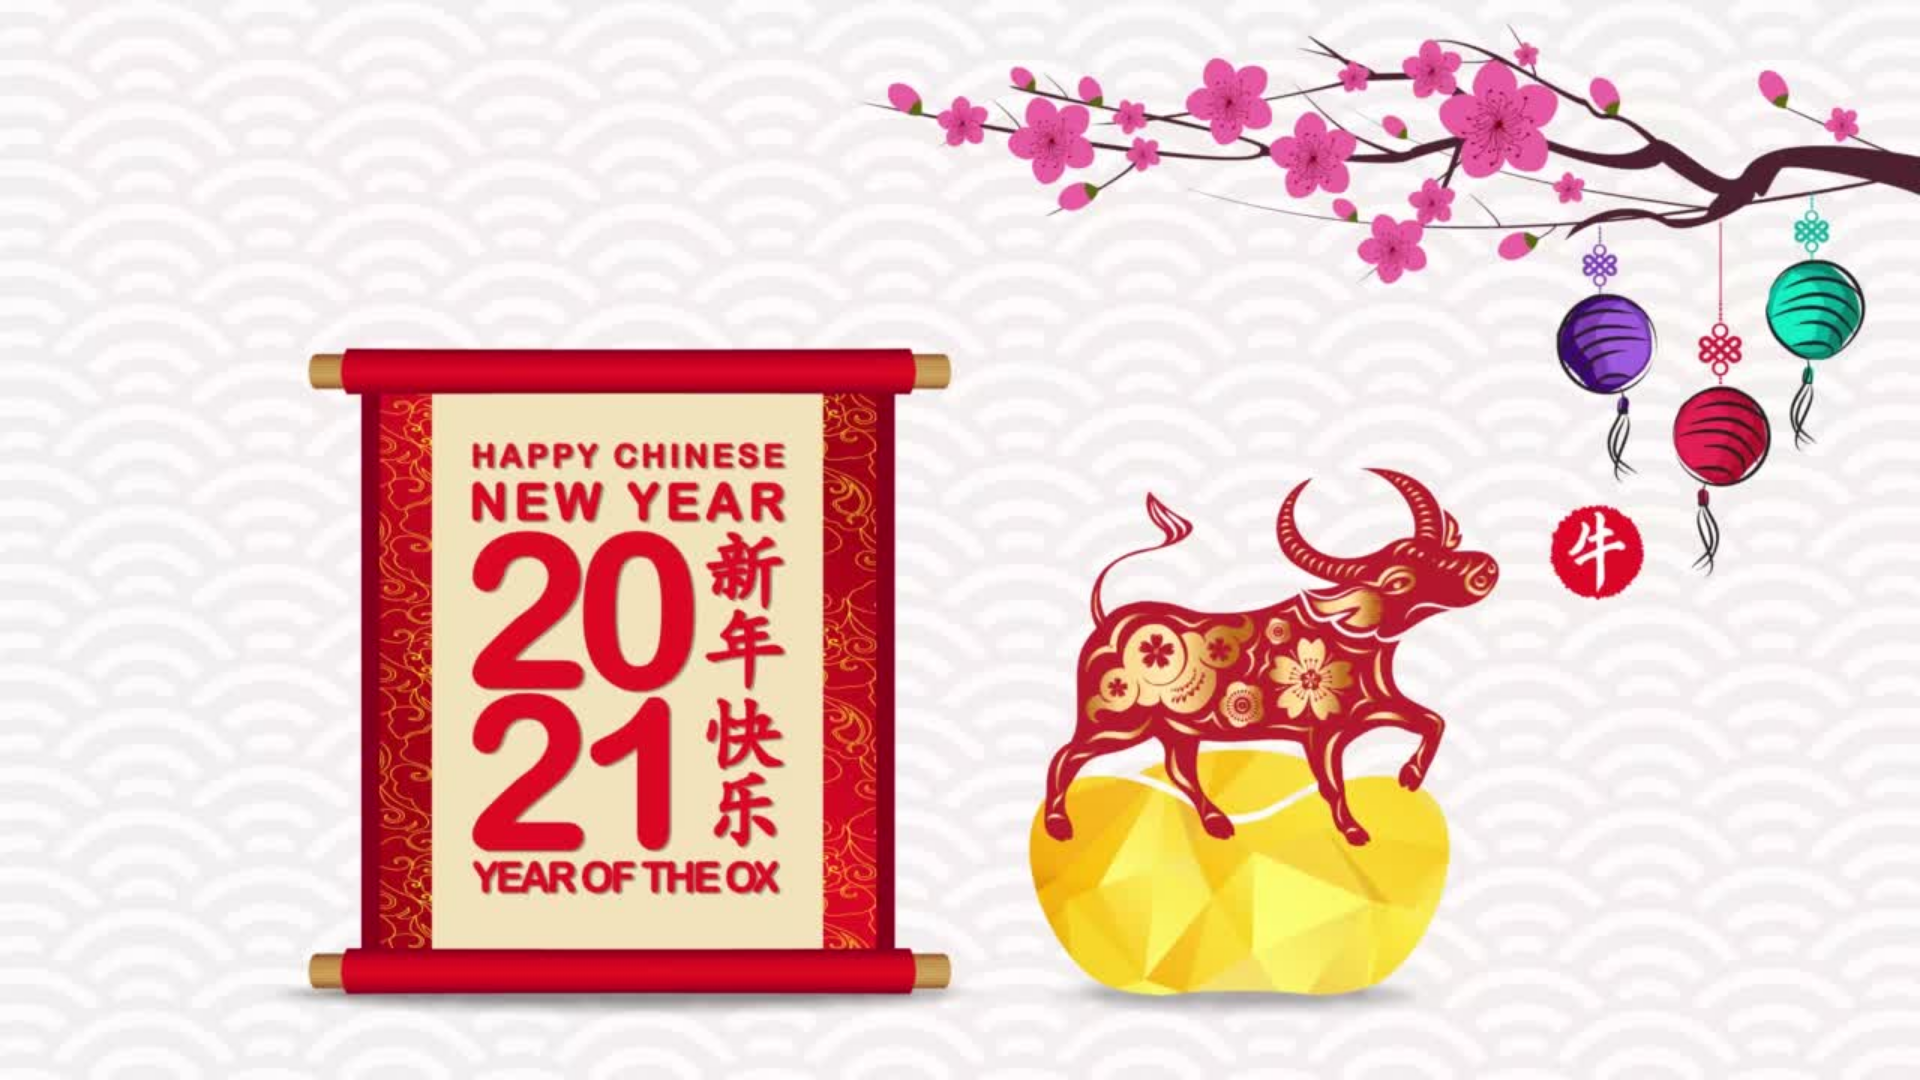 Image of an ox with a tree branch overhead.  Ornaments dangle from the tree.  A decorative scroll reads: Happy Chinese New Year 2021.  Year of the Ox.